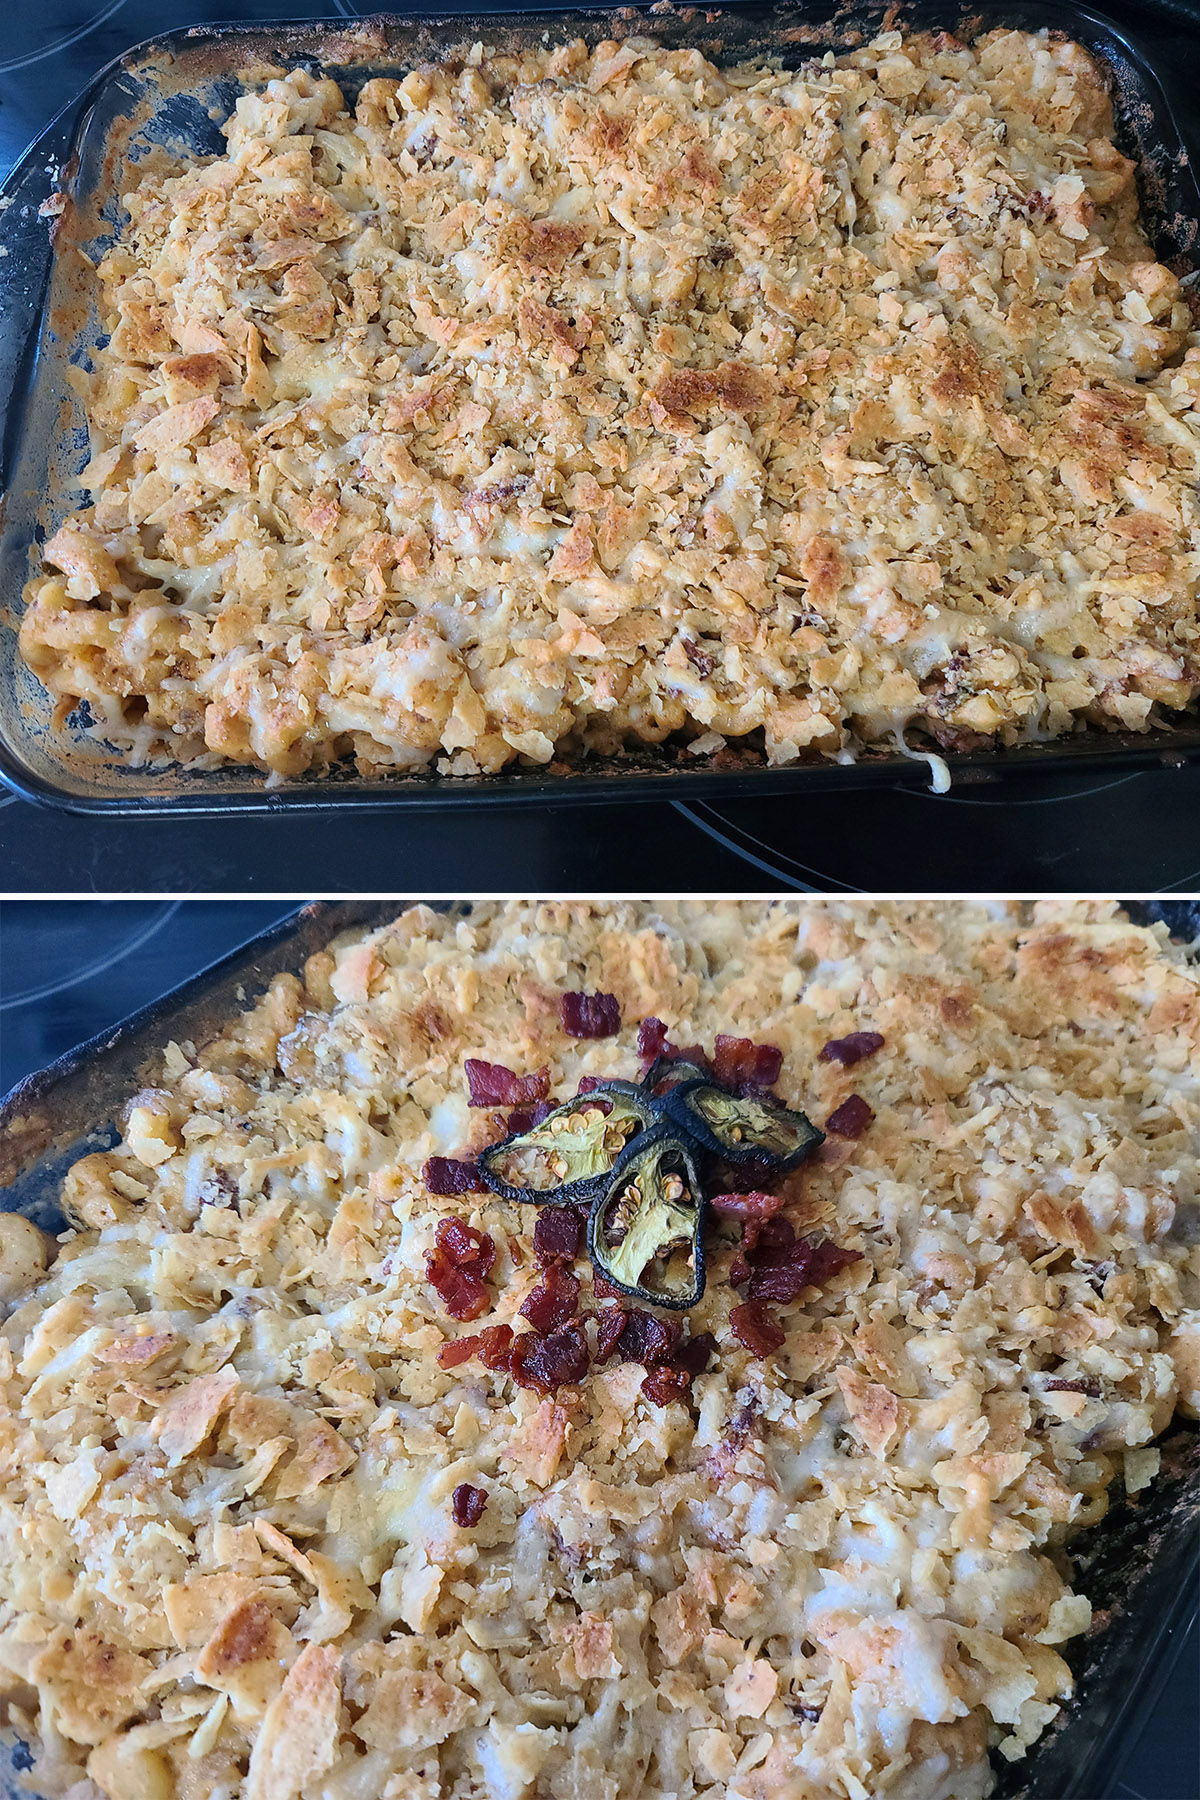 A 2 part image showing the broiled pan of mac and cheese, then topped with more bacon and jalapeno slices.